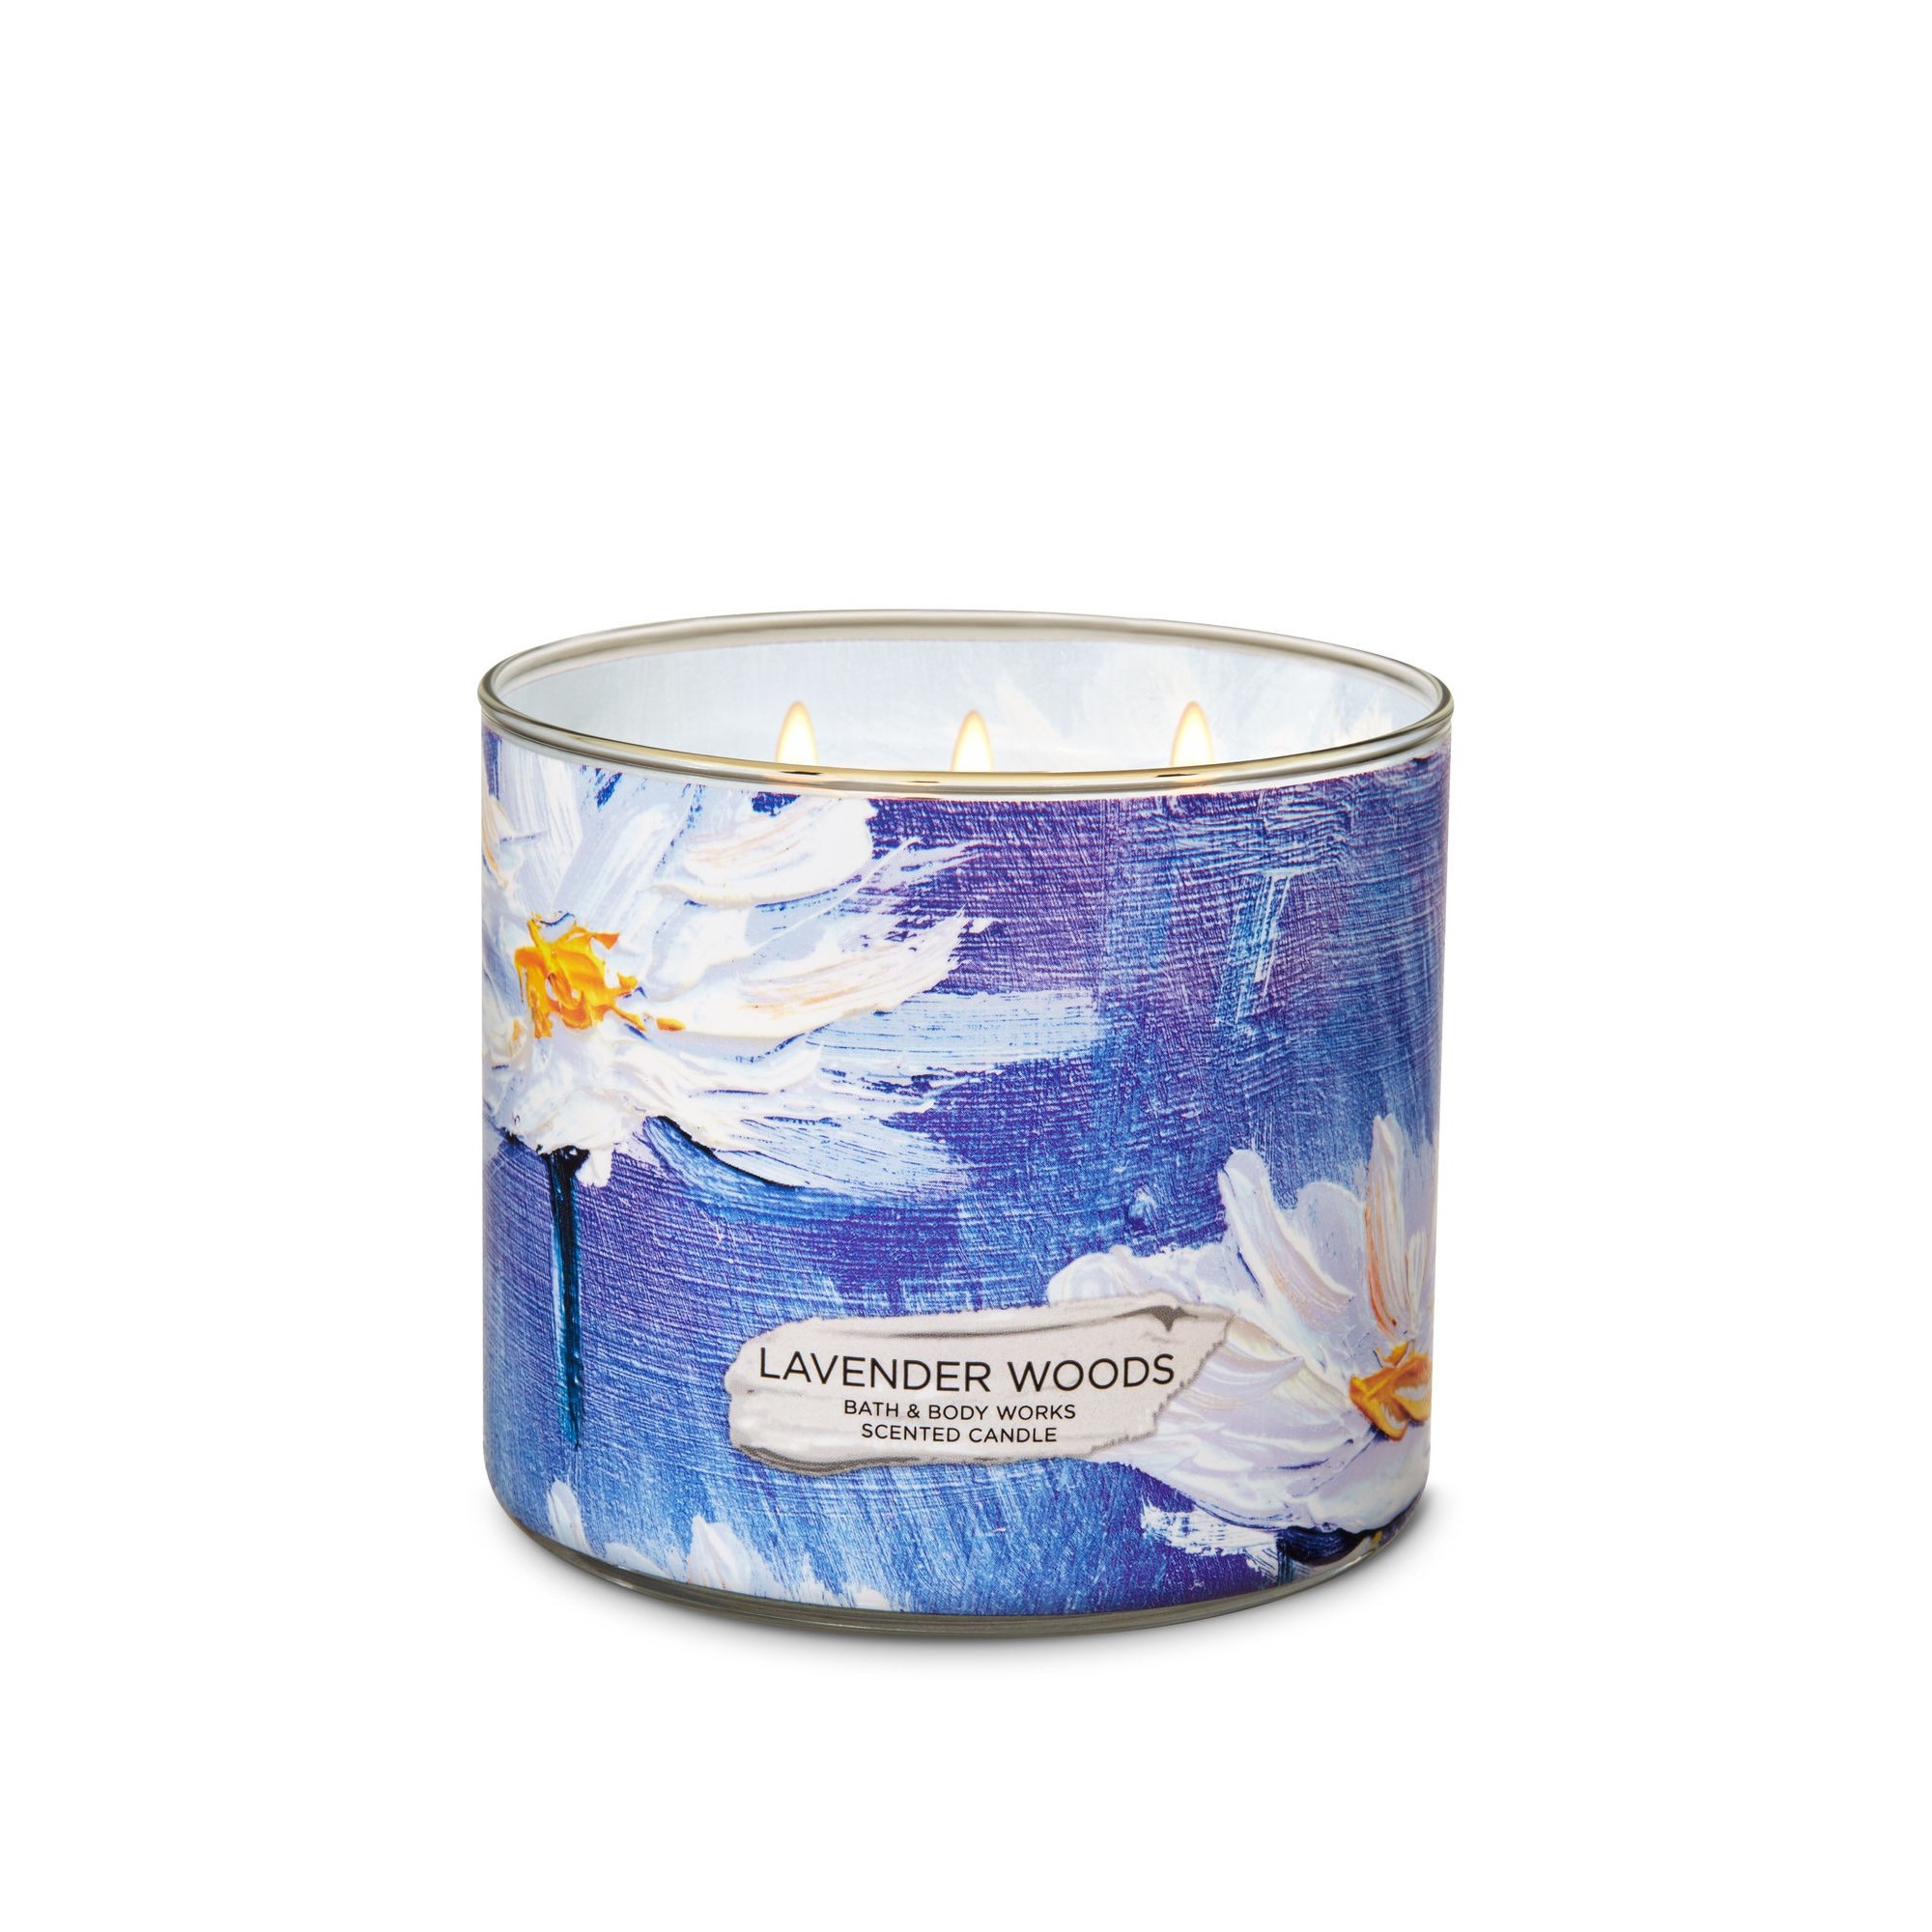 Bath & Body Works Lavender Woods 3 Wick Scented Candle